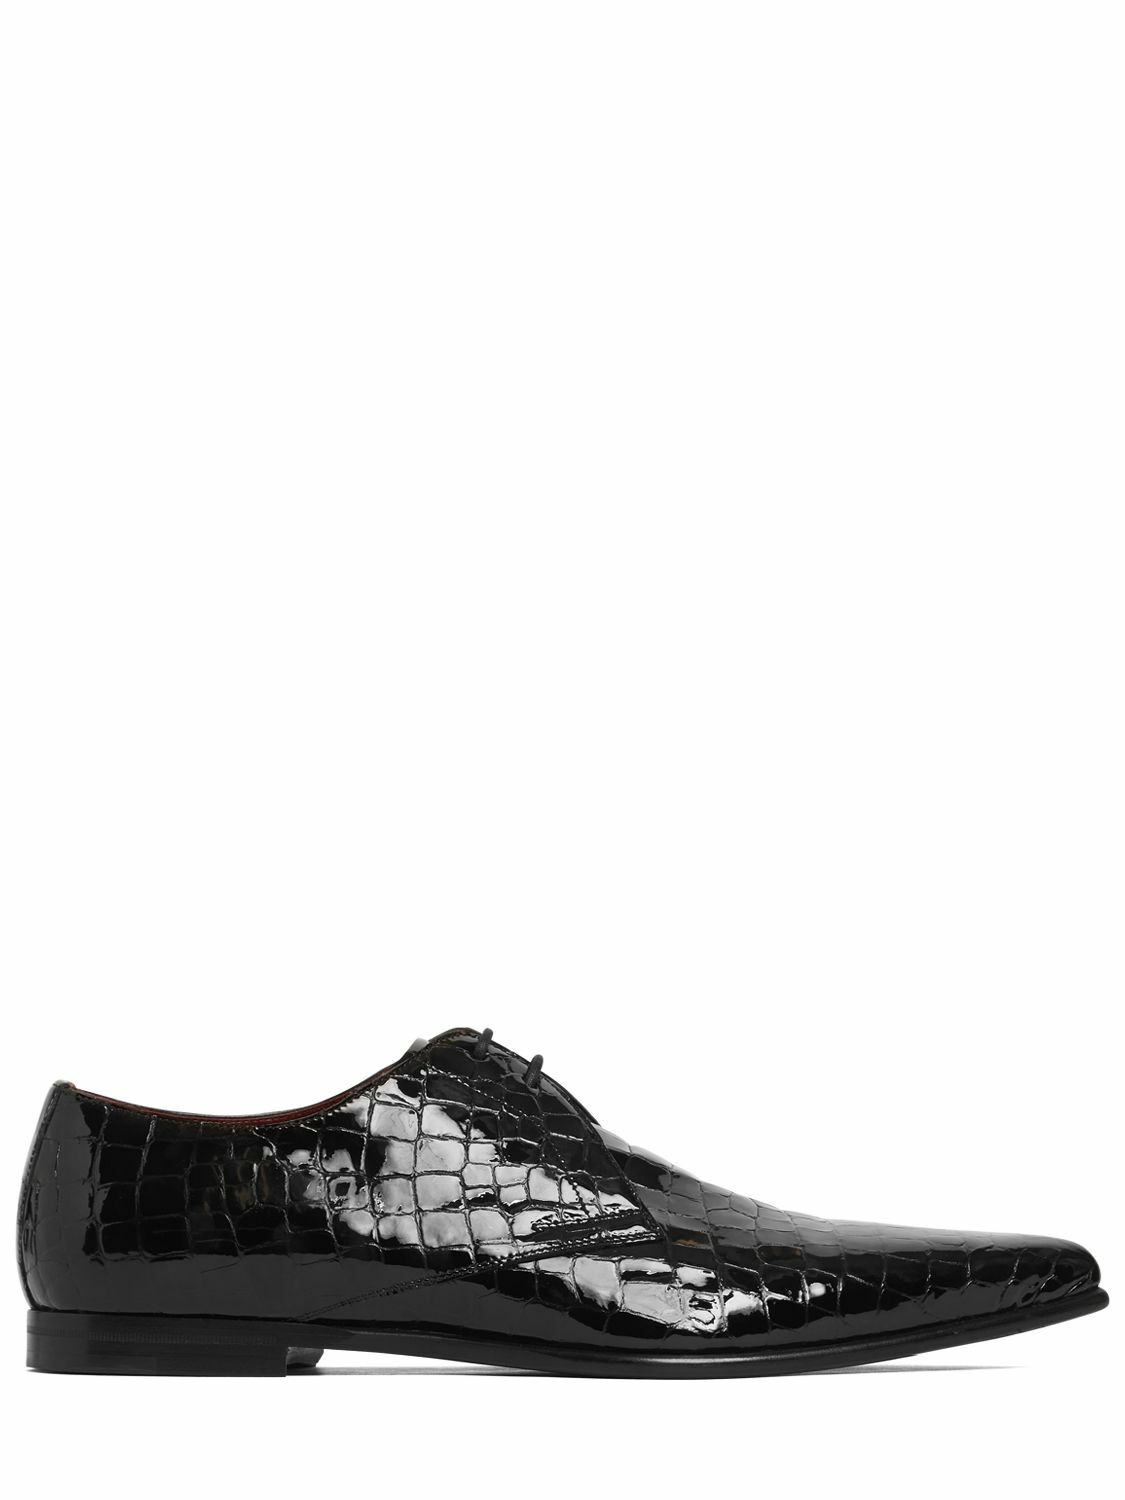 Photo: DOLCE & GABBANA - Achille Croc Embossed Leather Derby Shoe